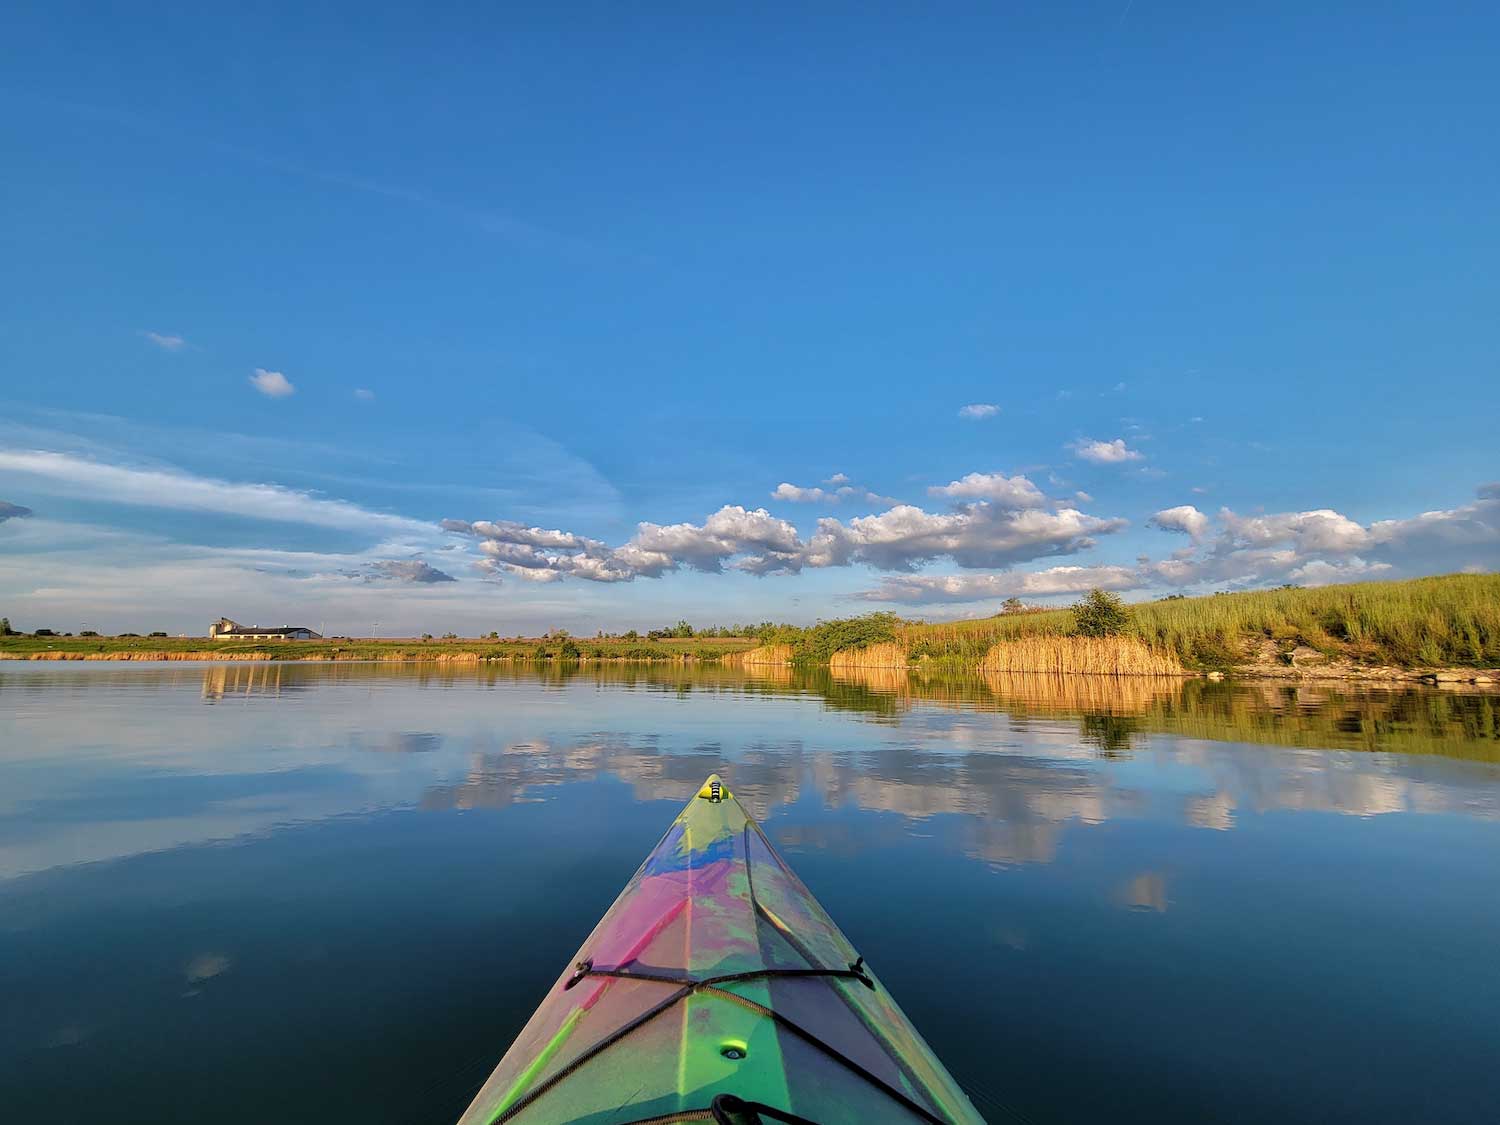 The front of a kayak on open water with a blue sky above.